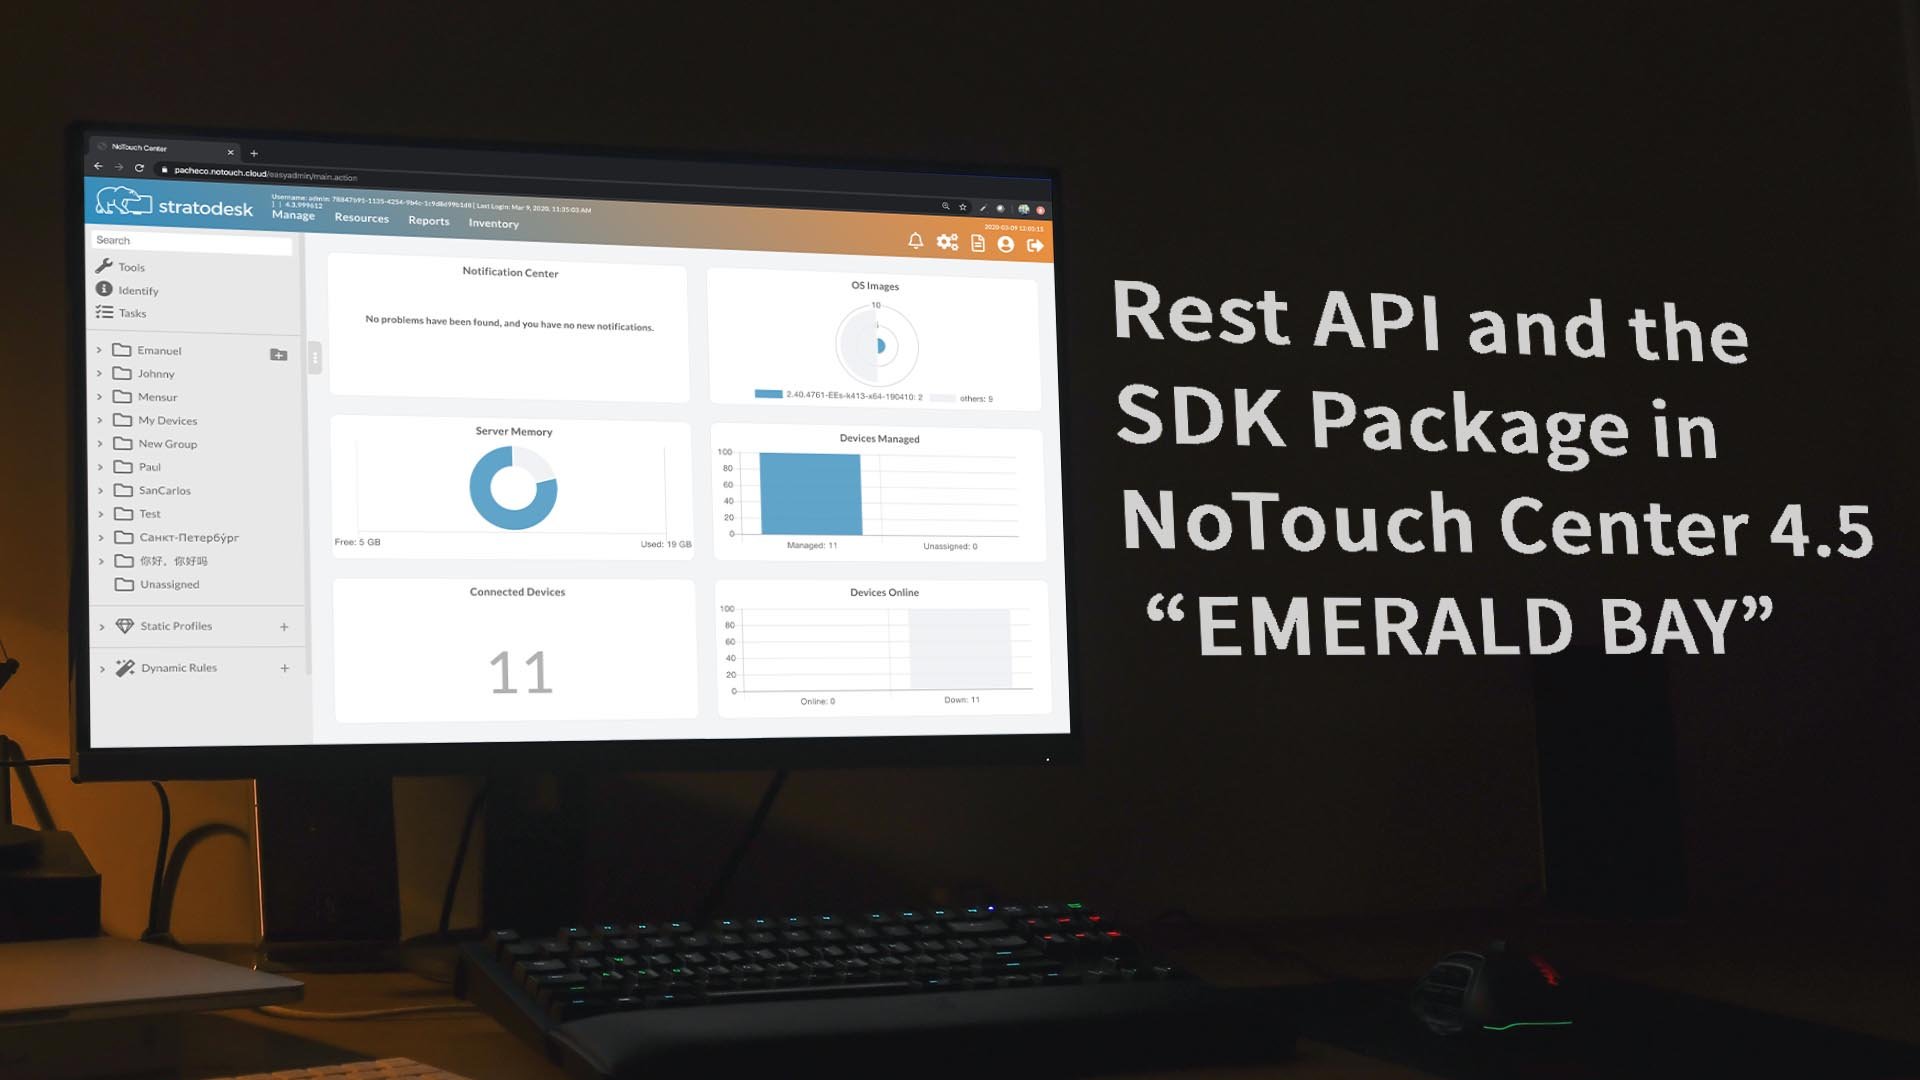 Rest API and the SDK Package Blog